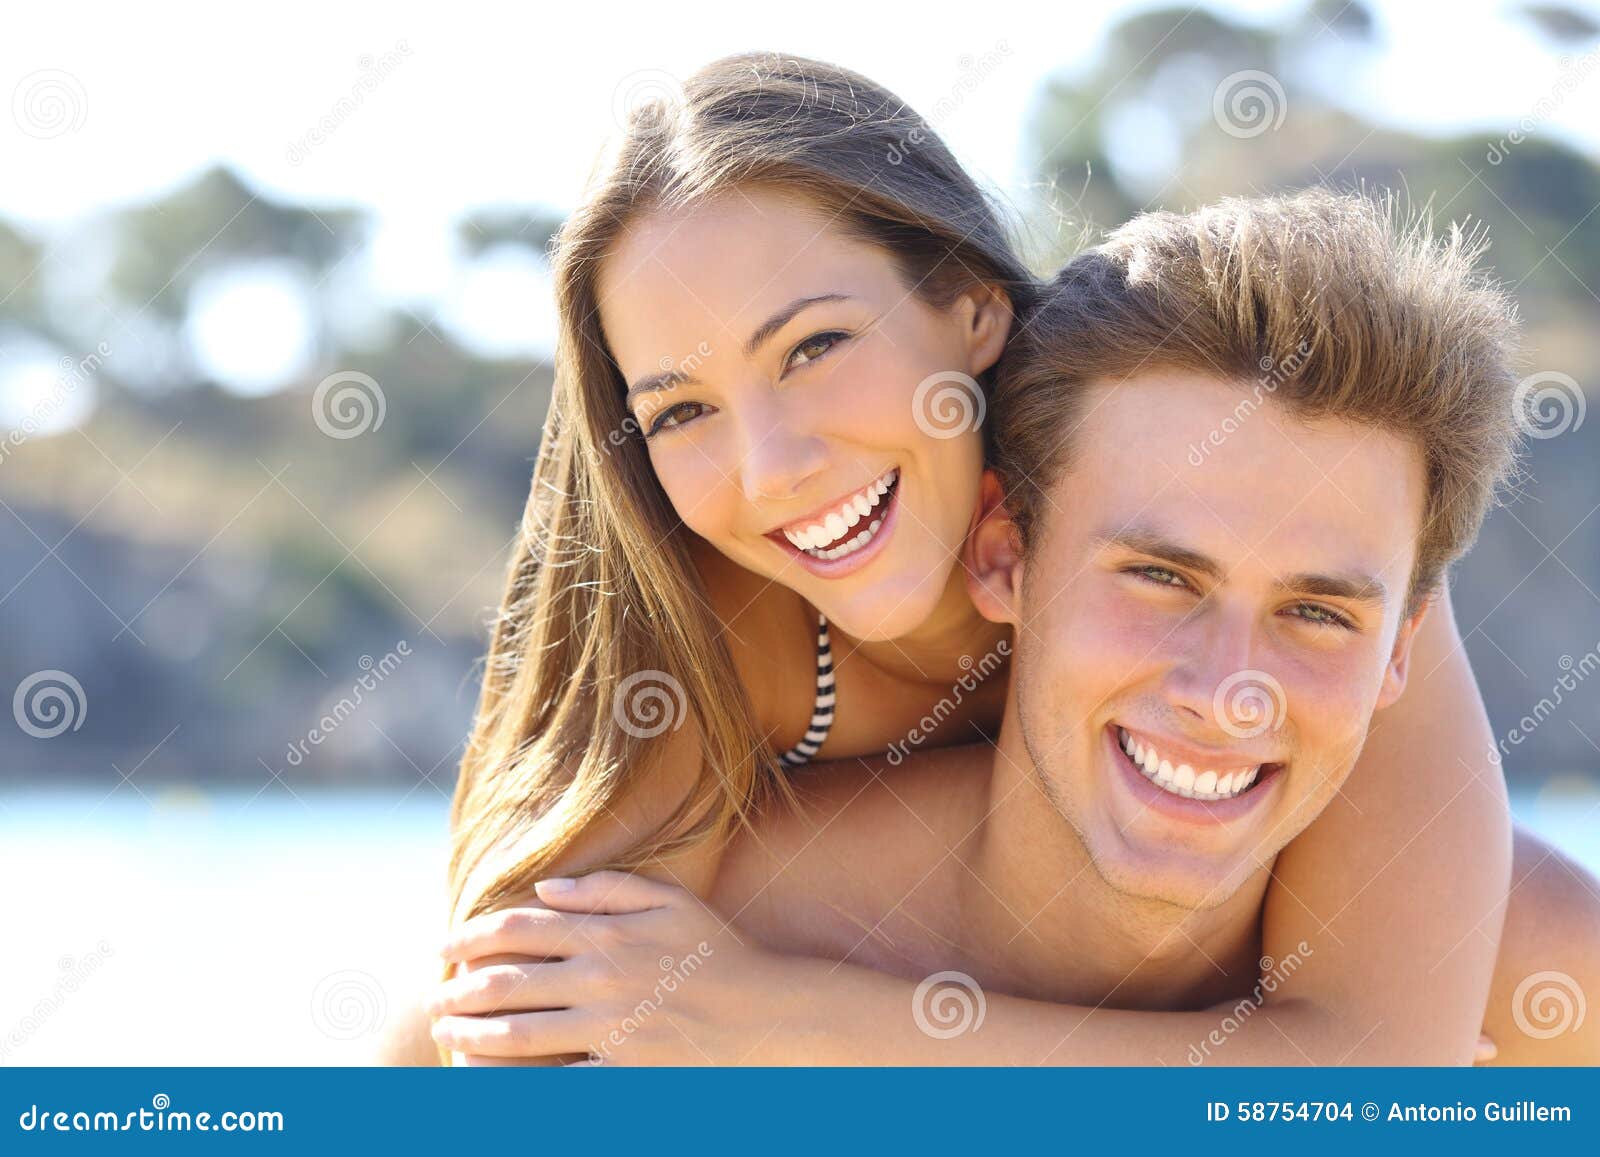 couple with perfect smile posing on the beach